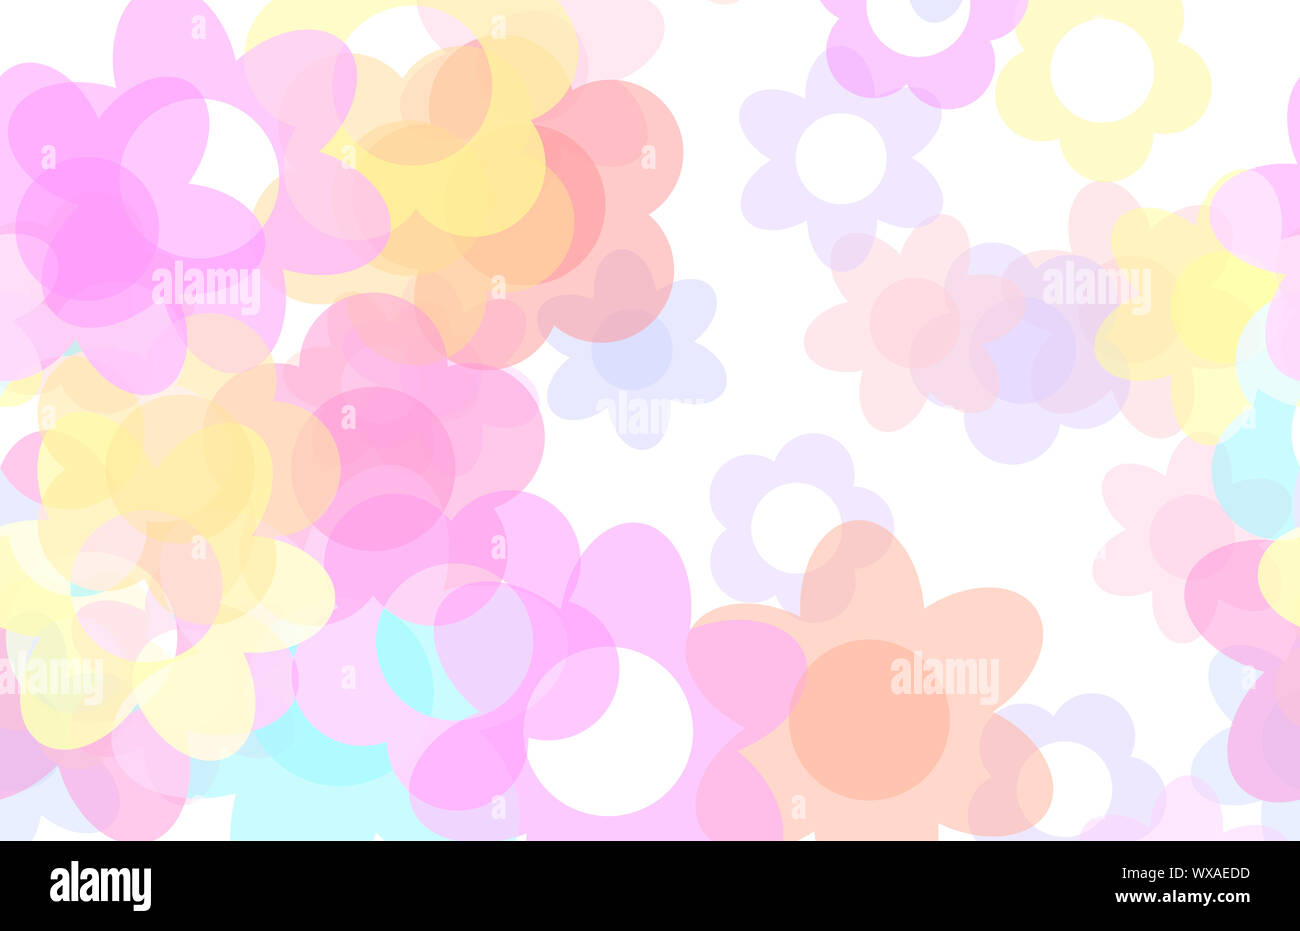 Cute Cartoon Flowers Background with Floral Art Stock Photo - Alamy